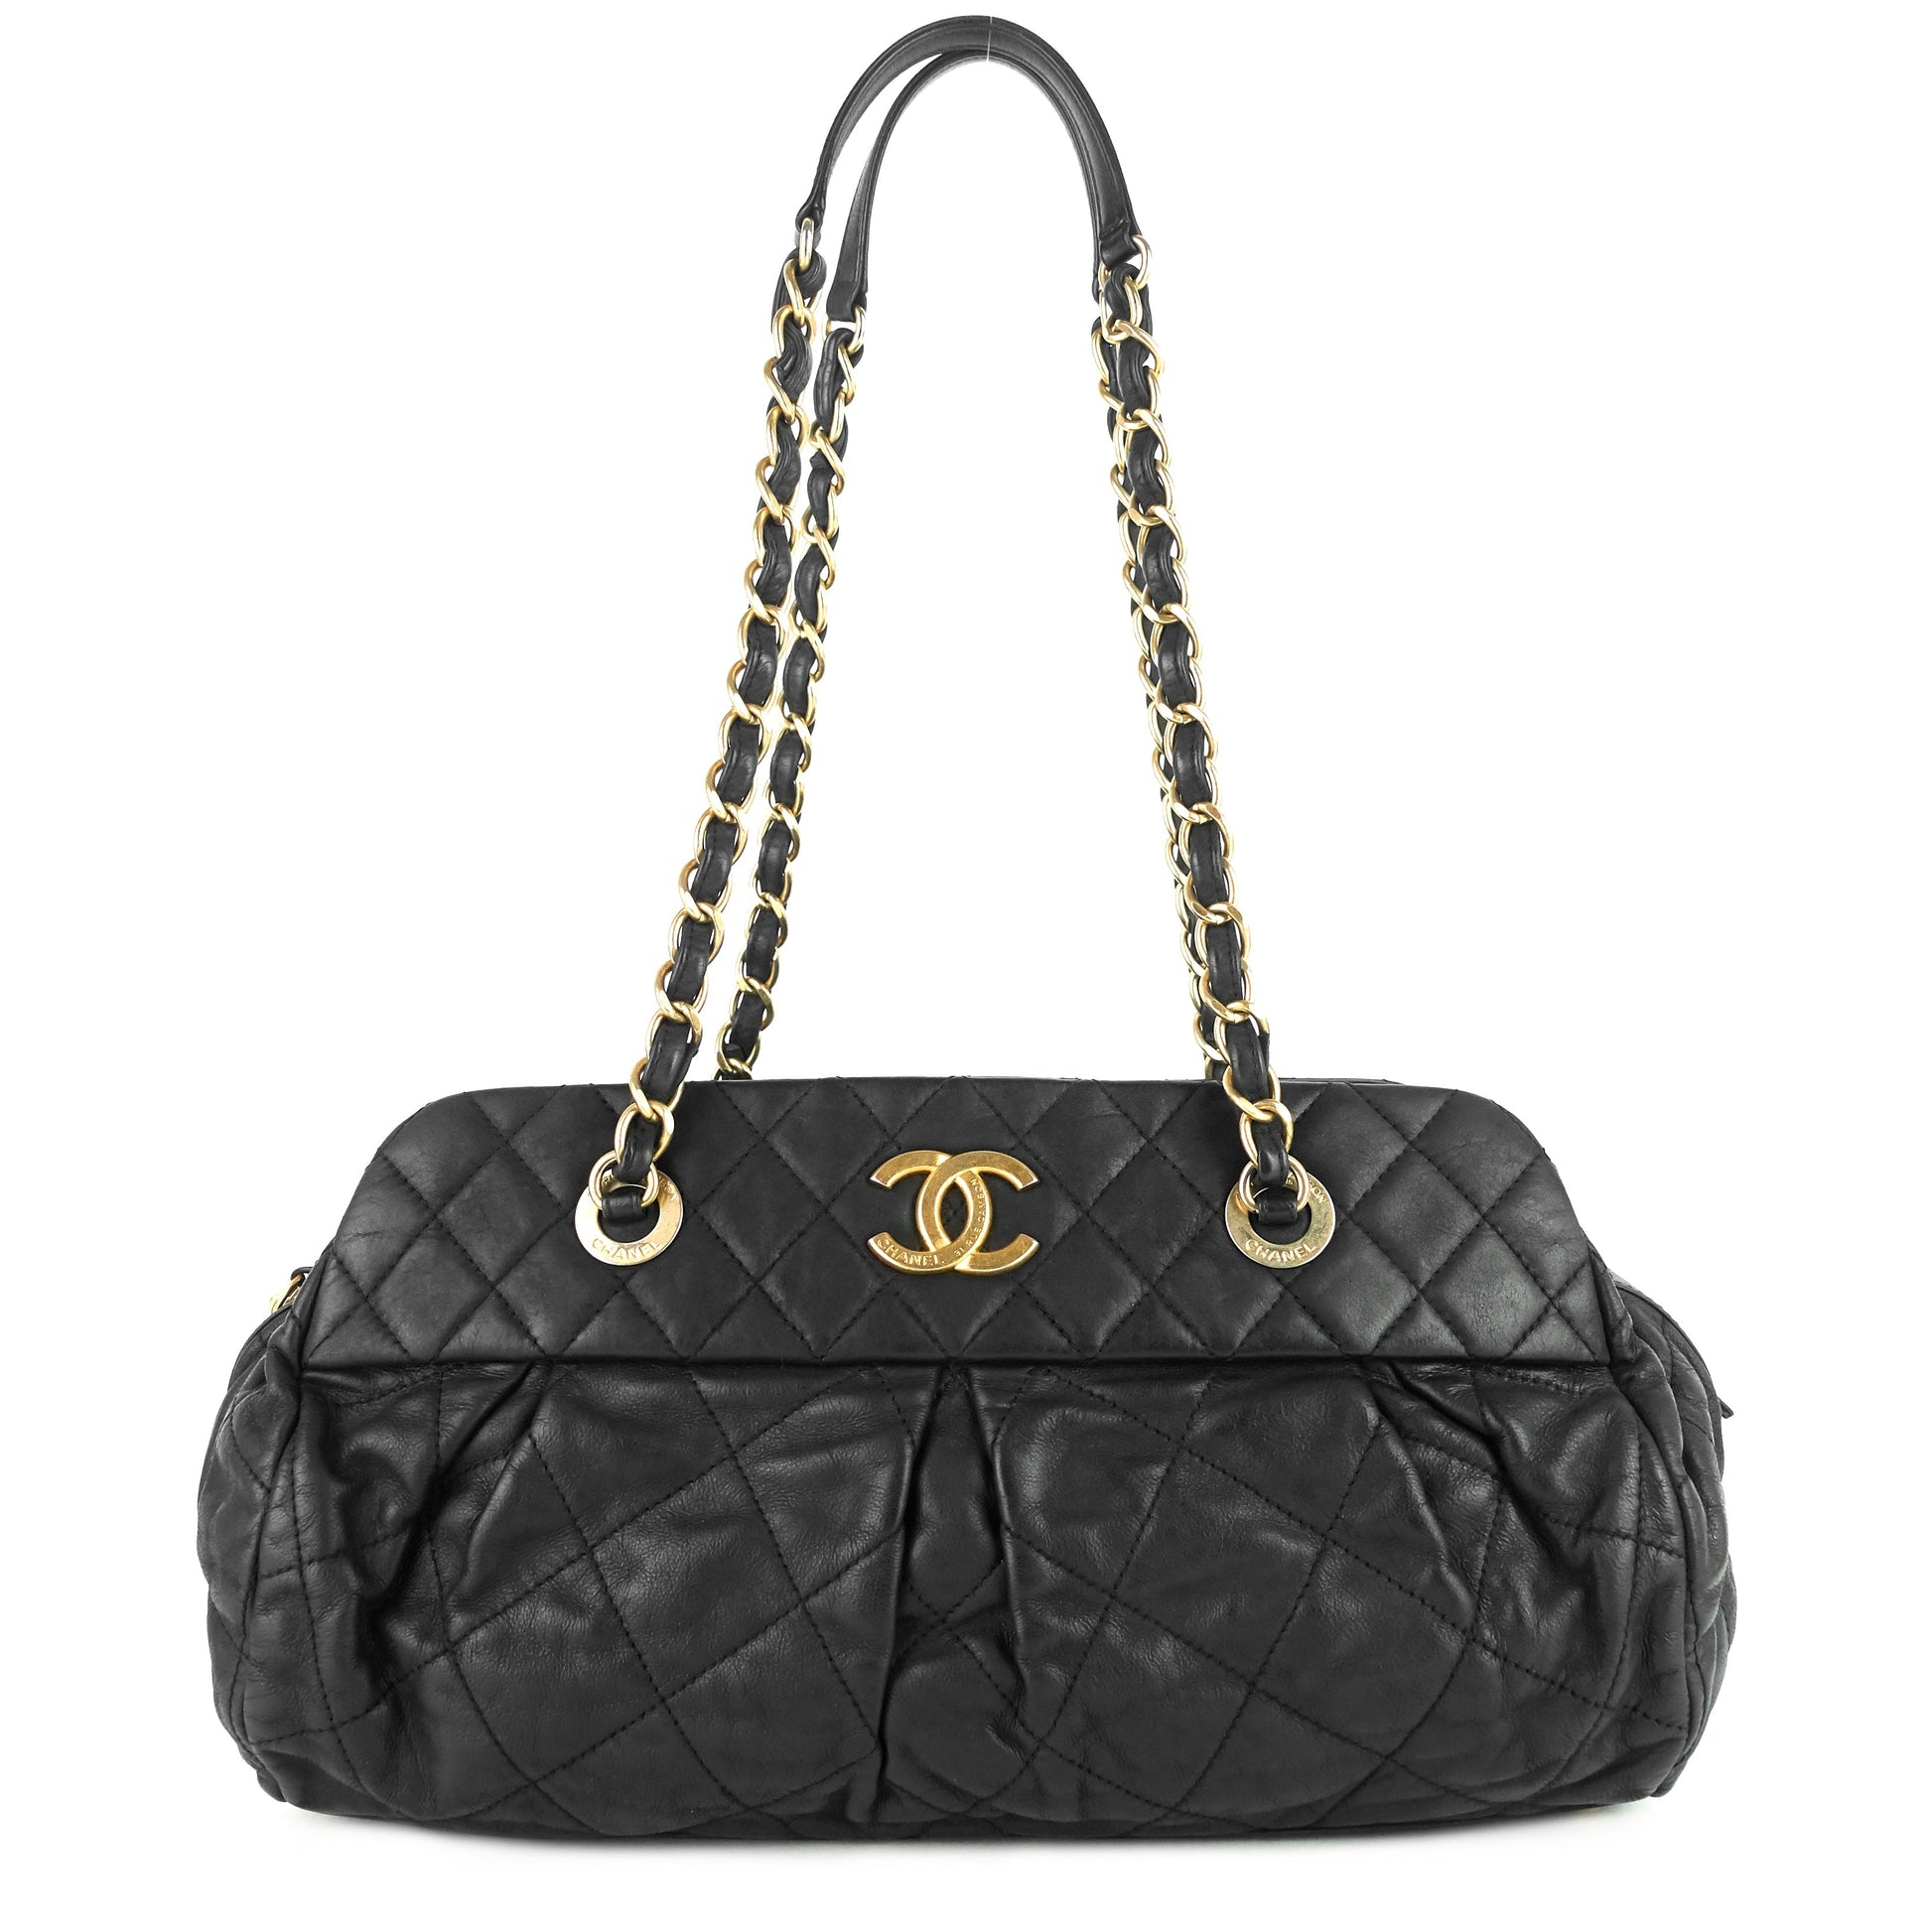 CHANEL Chic Quilted Iridescent Calfskin Leather Bowling Bag